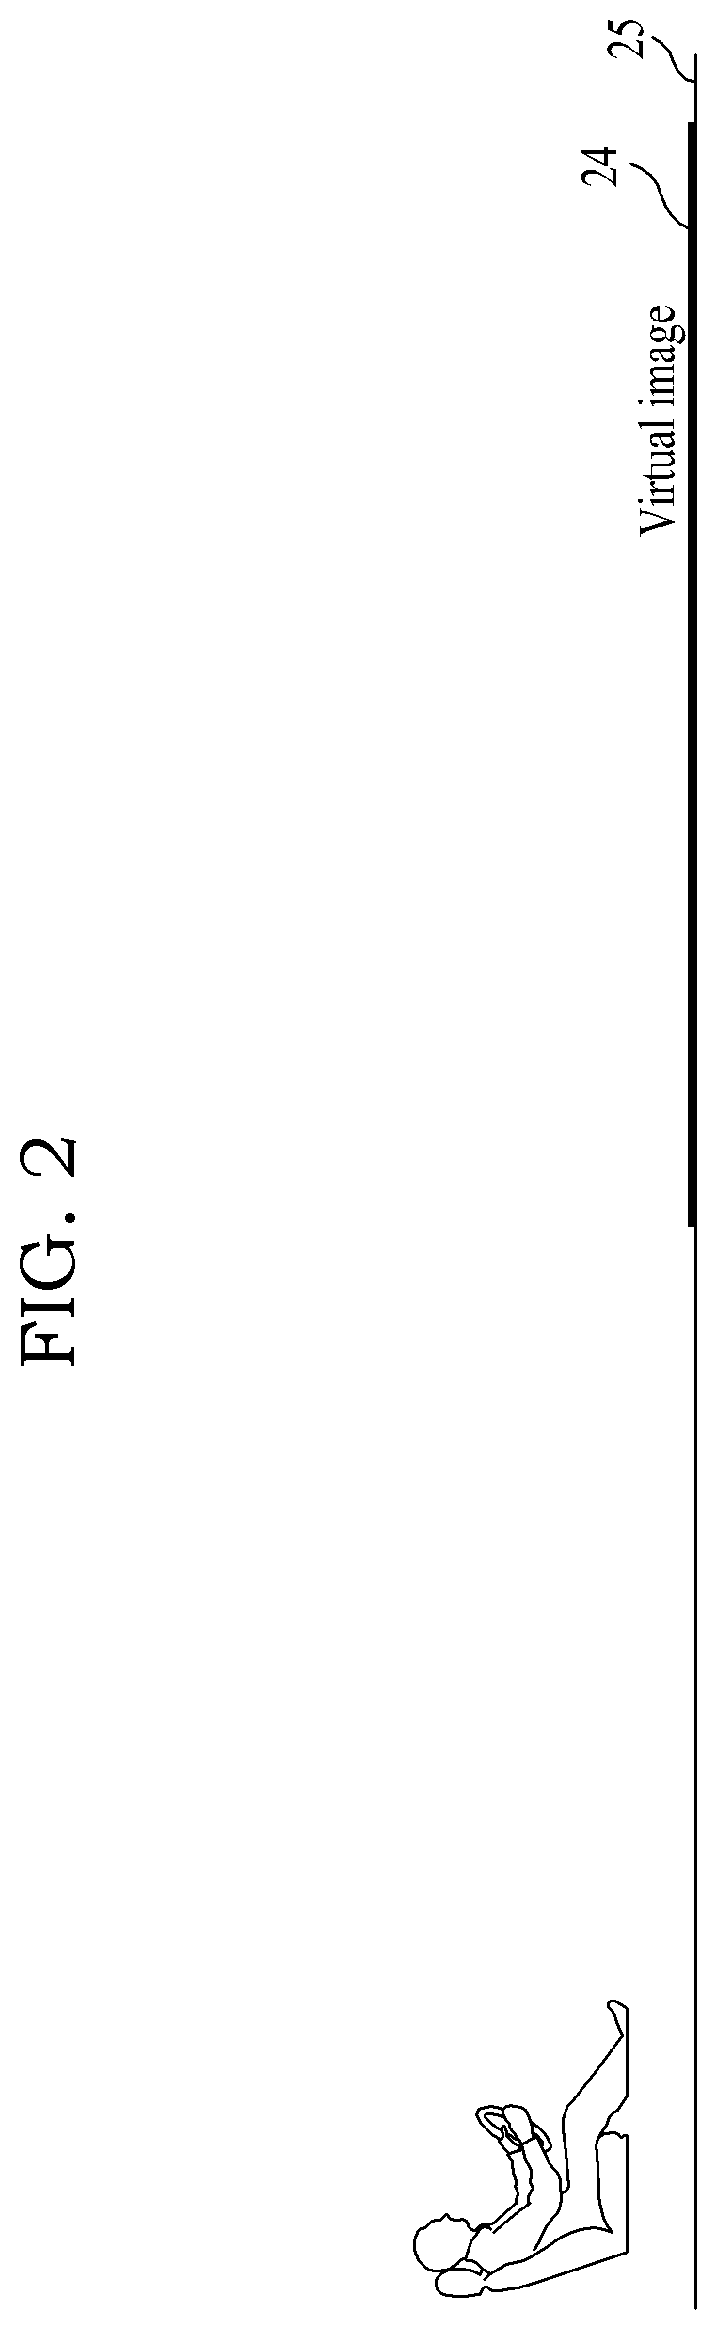 Three-dimensional augmented reality head-up display for positioning virtual image on ground by means of windshield reflection method